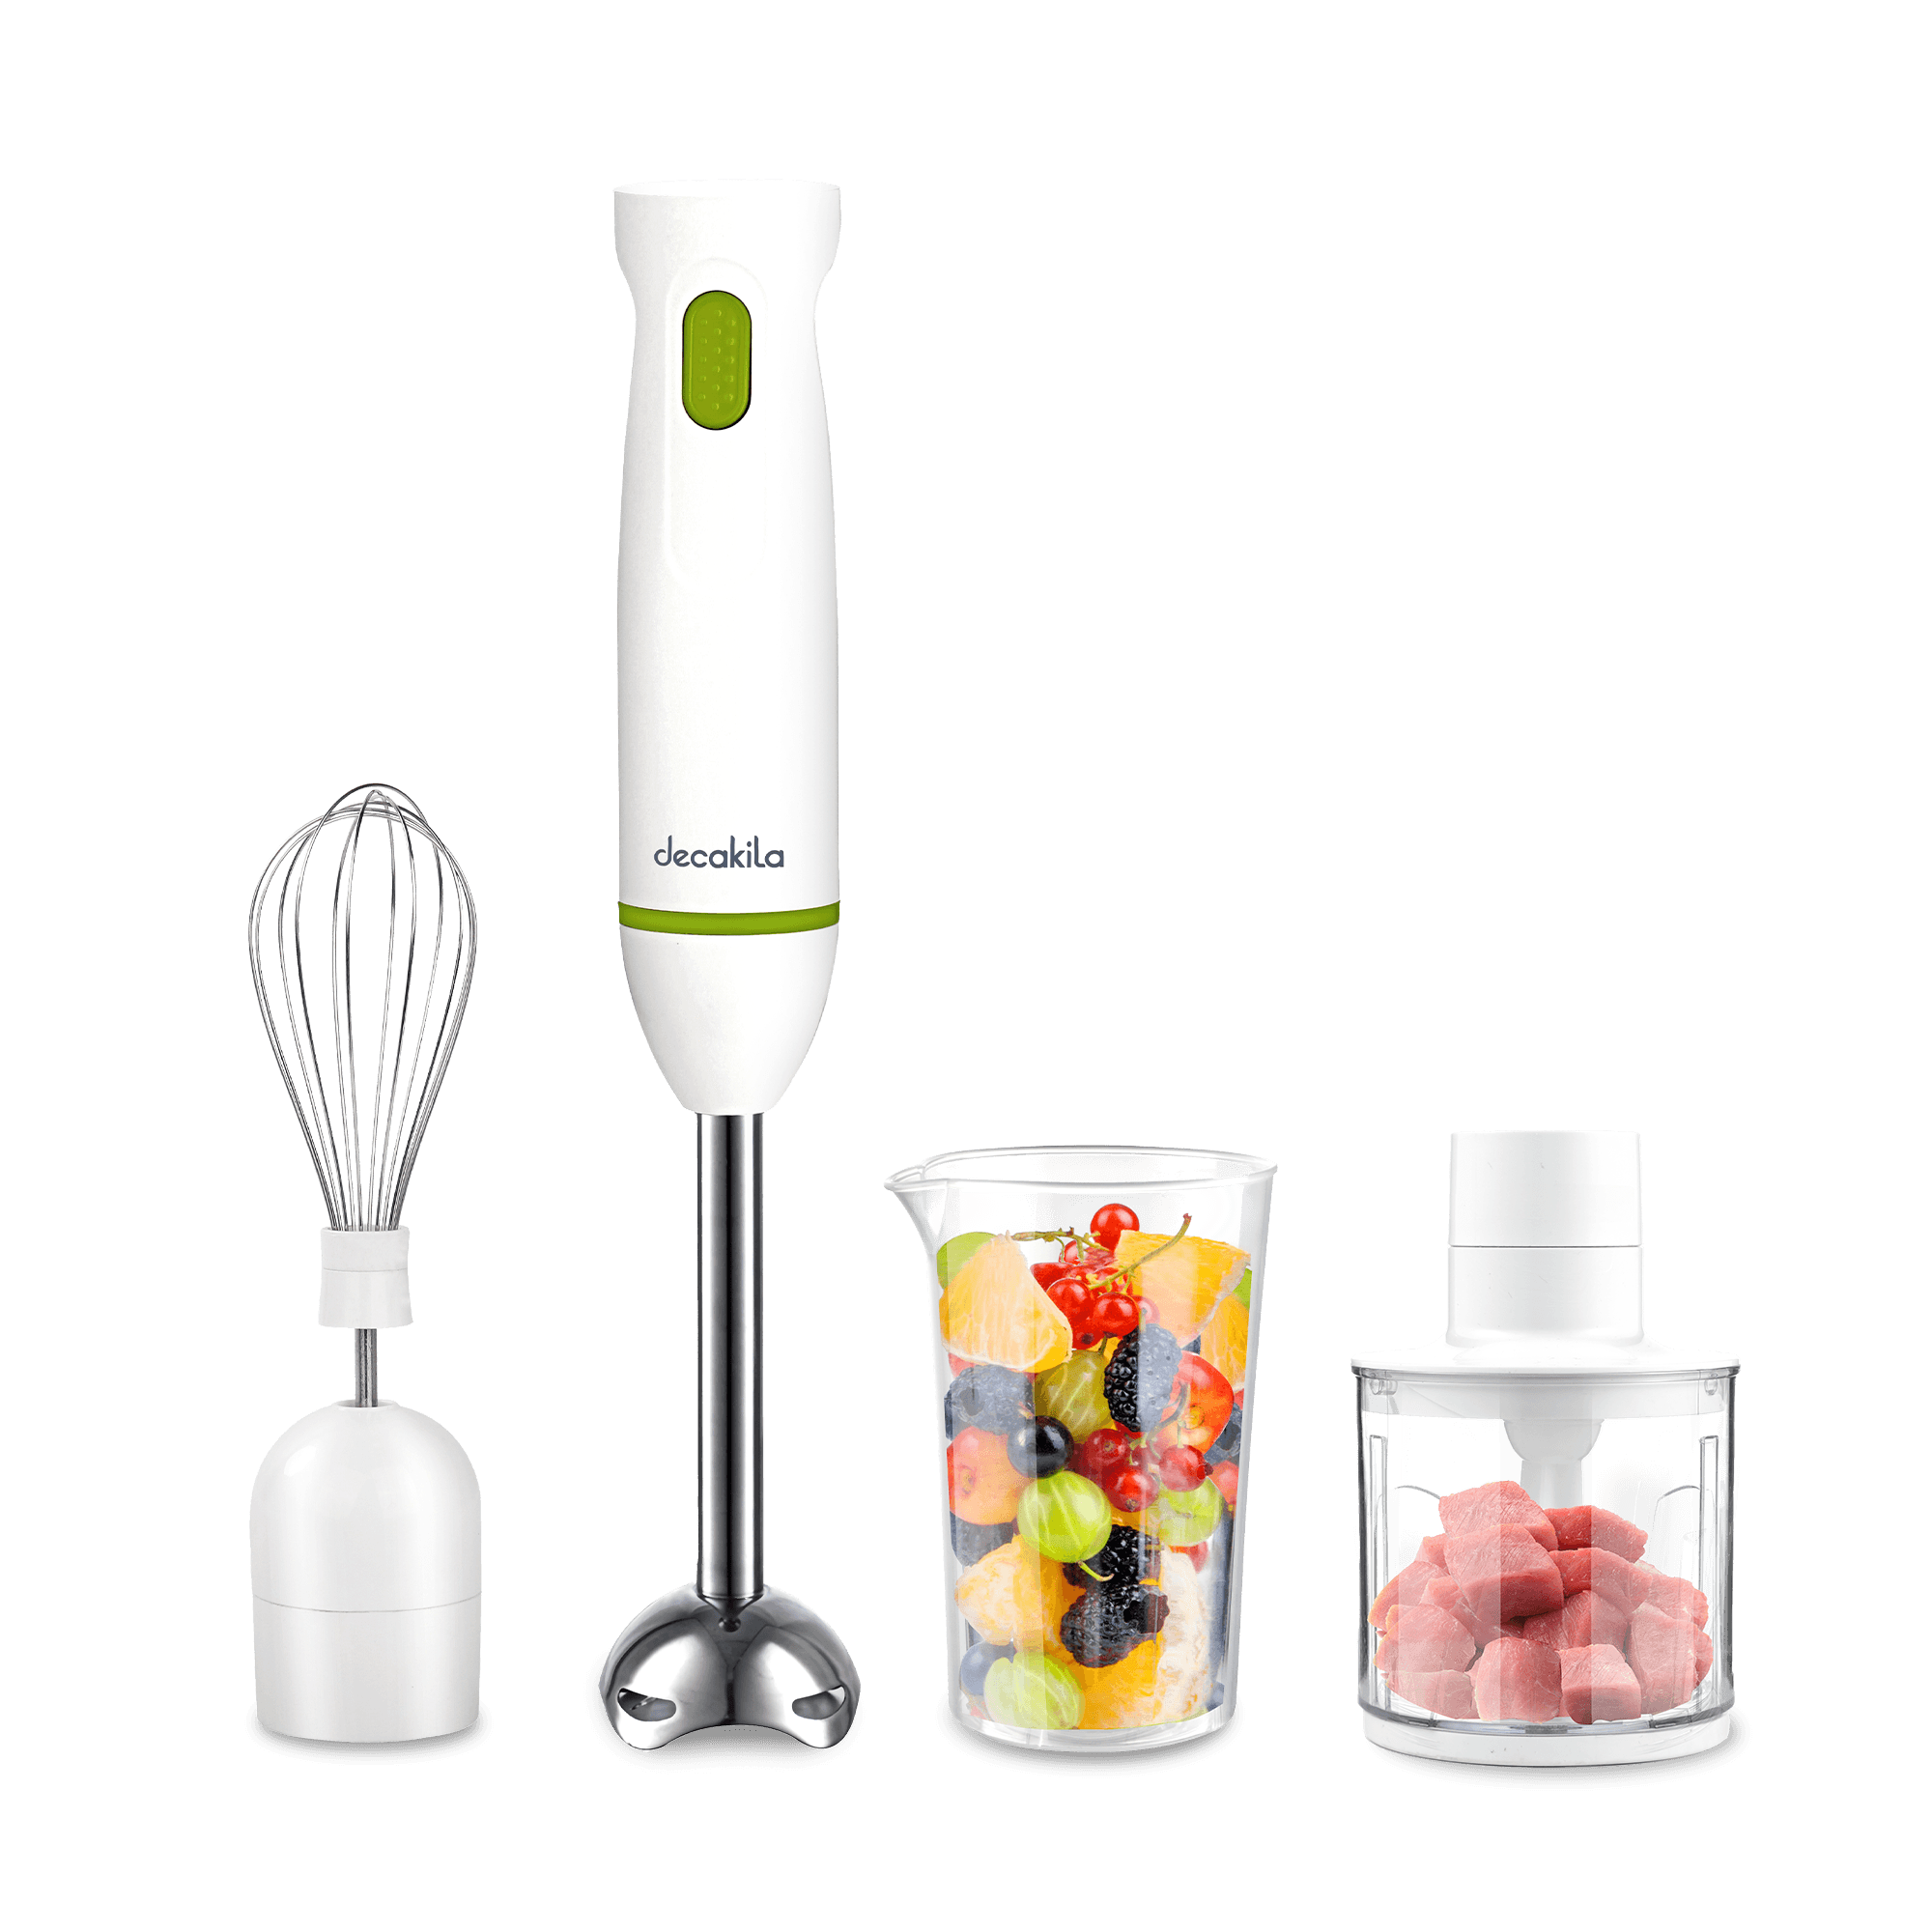 Buy Decakila 600W Hand Blender for Effortless Cooking in Accra, Ghana | Supply Master Kitchen Appliances Buy Tools hardware Building materials